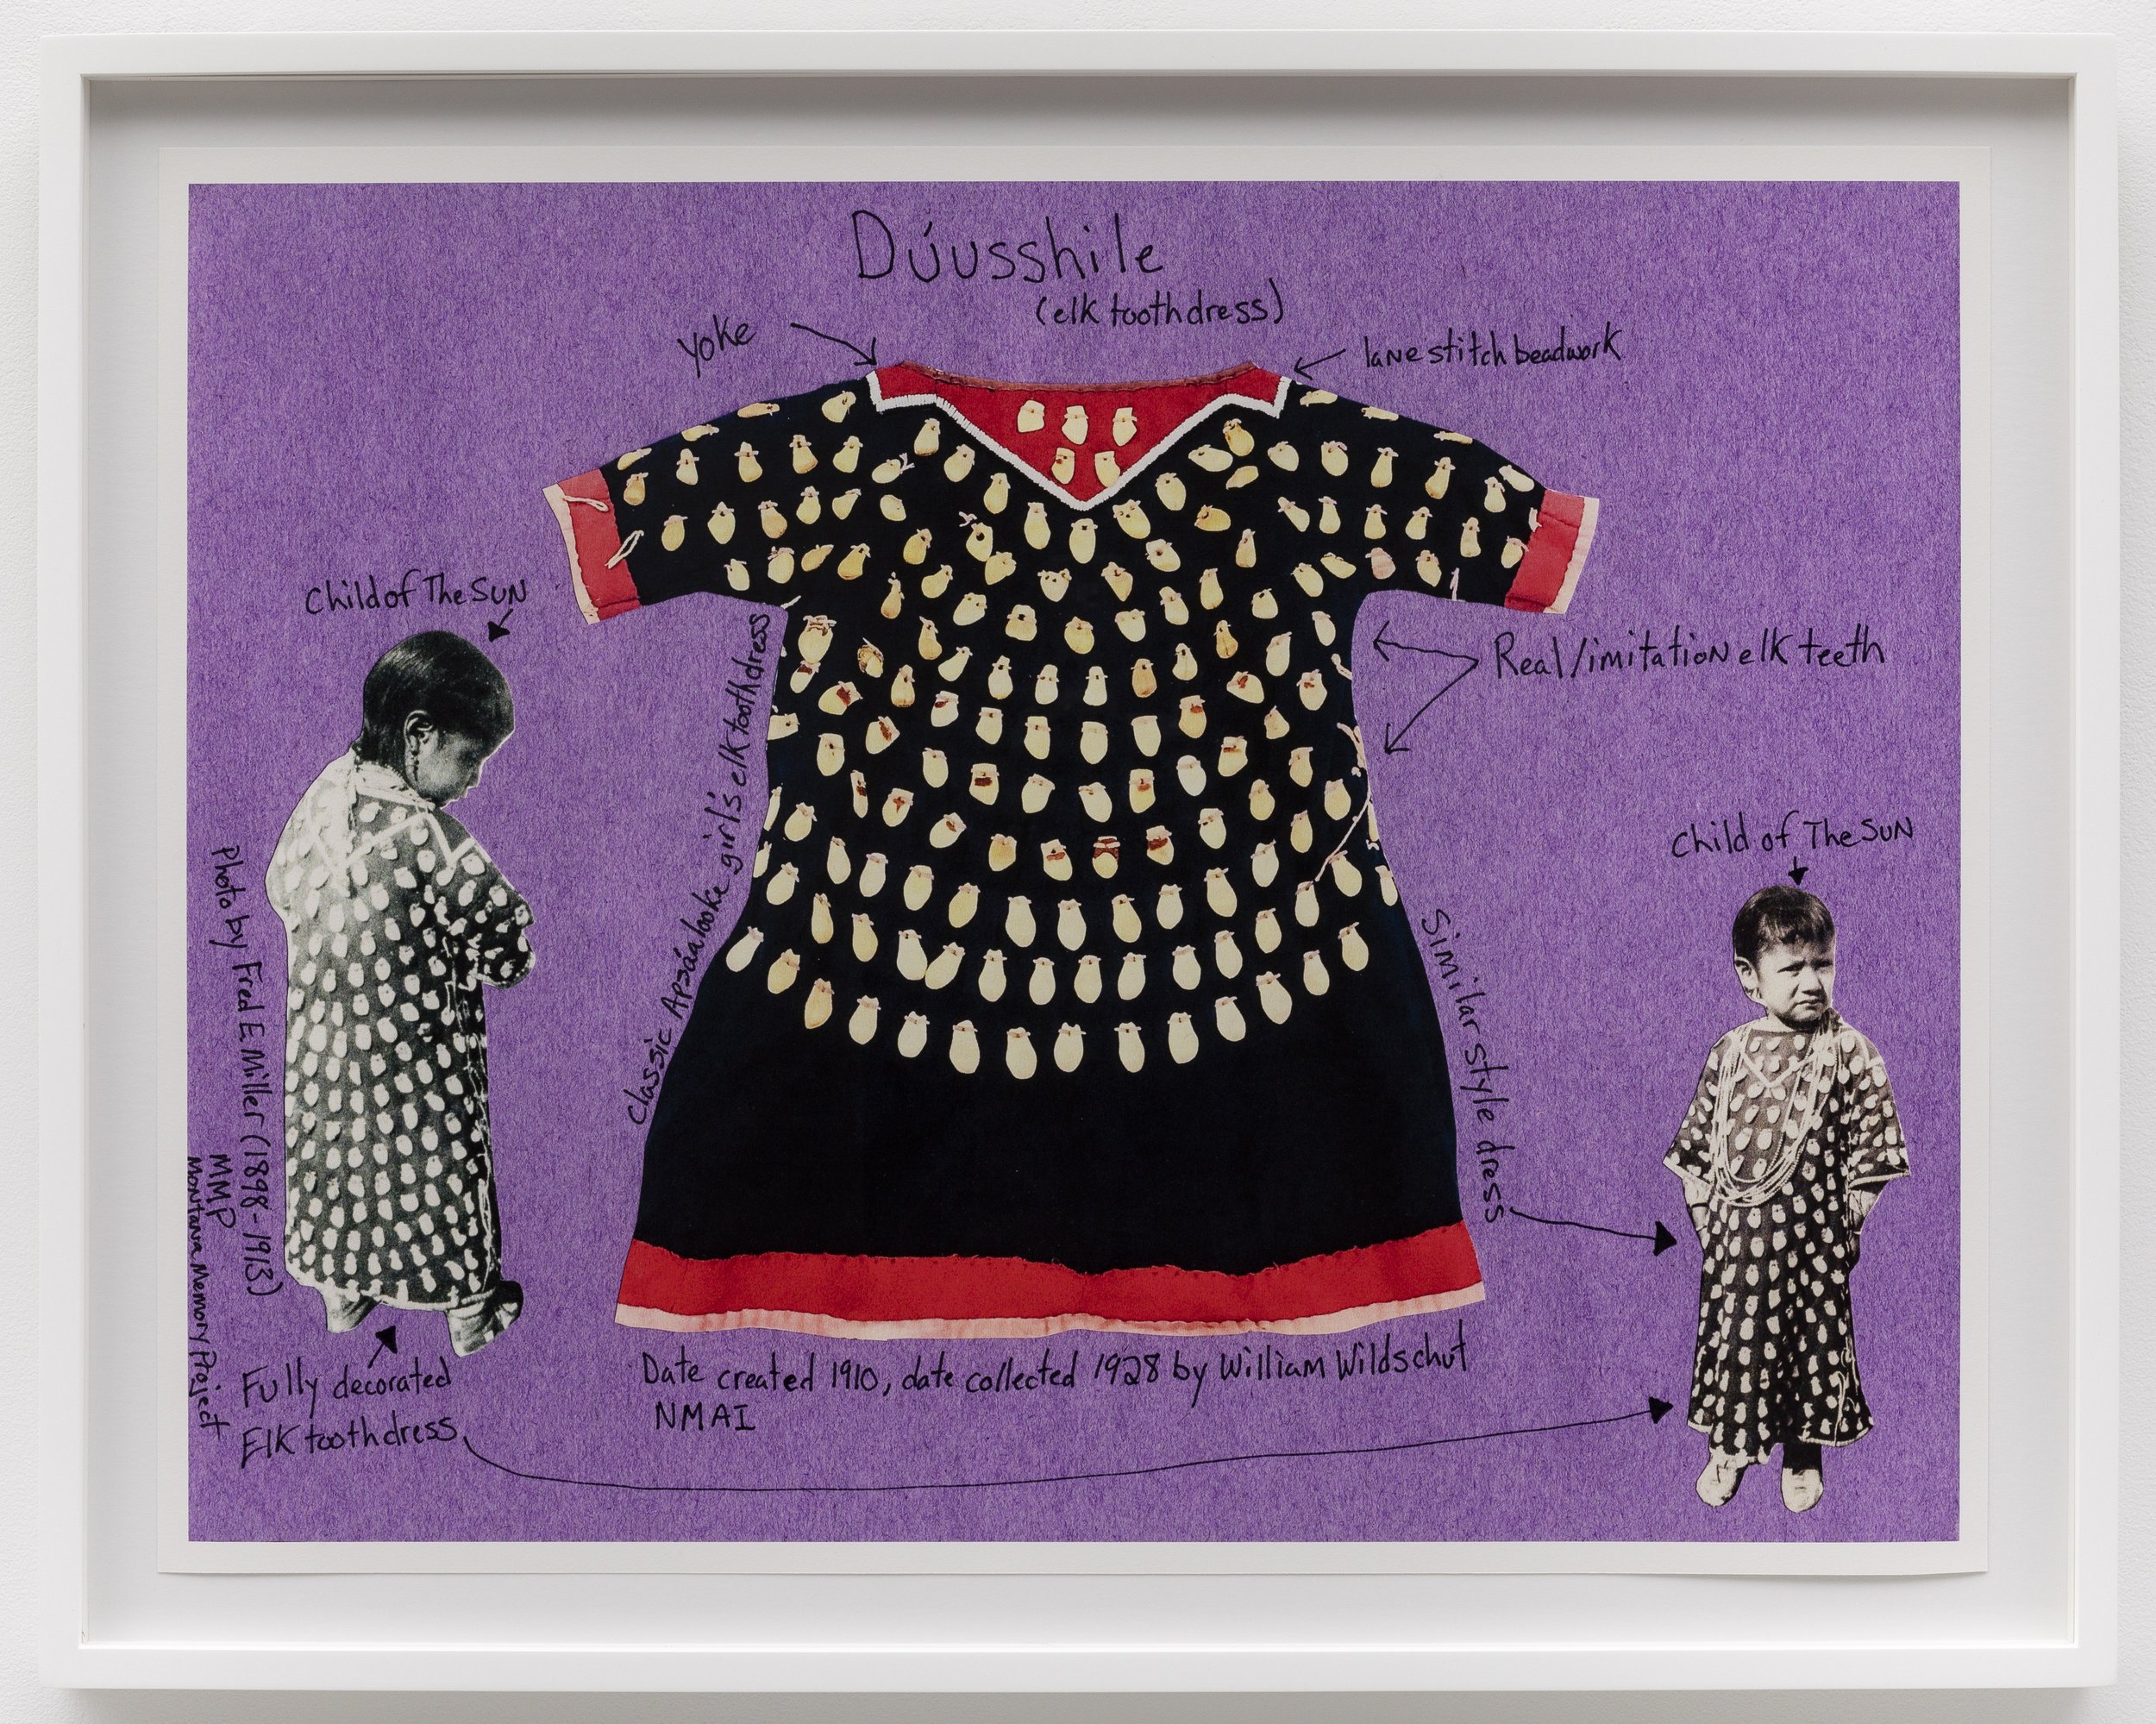   Set A: dúusshile (elk tooth dress); huxshé (glove); Biitawuásh (Chief Bell Rock); ispúuchihke (wedding blanket),  2023, Archival pigment print on Satin Photo Rag, 20.5 x 16 inches; 20.5 x 26.75 inches (papersize includes½ inch border), Edition 1 of